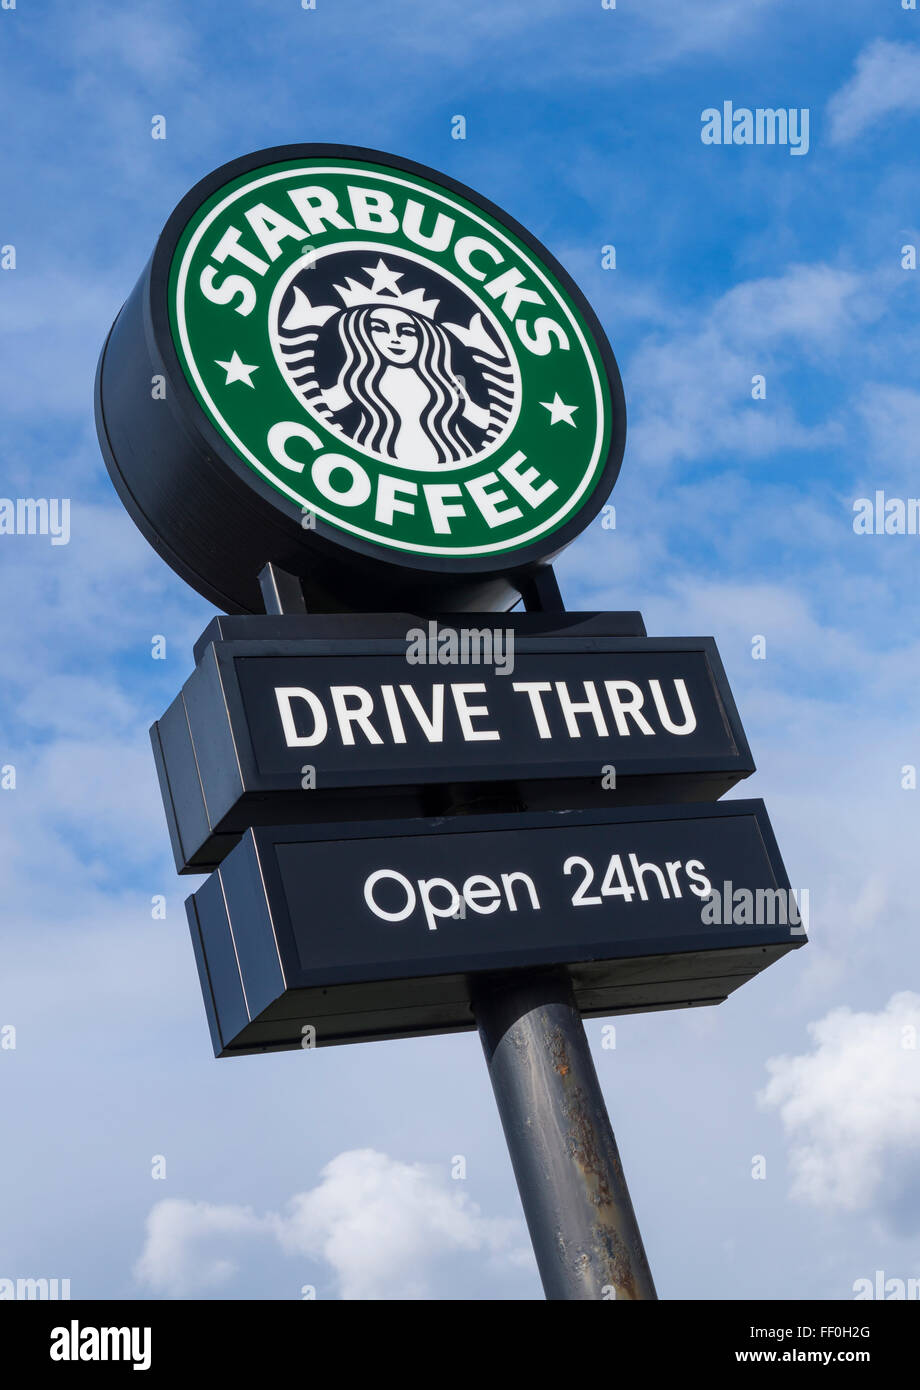 Starbucks Coffee Sign Drive Thru Open 24hrs outside their shop in Trafford Park, Manchester Stock Photo